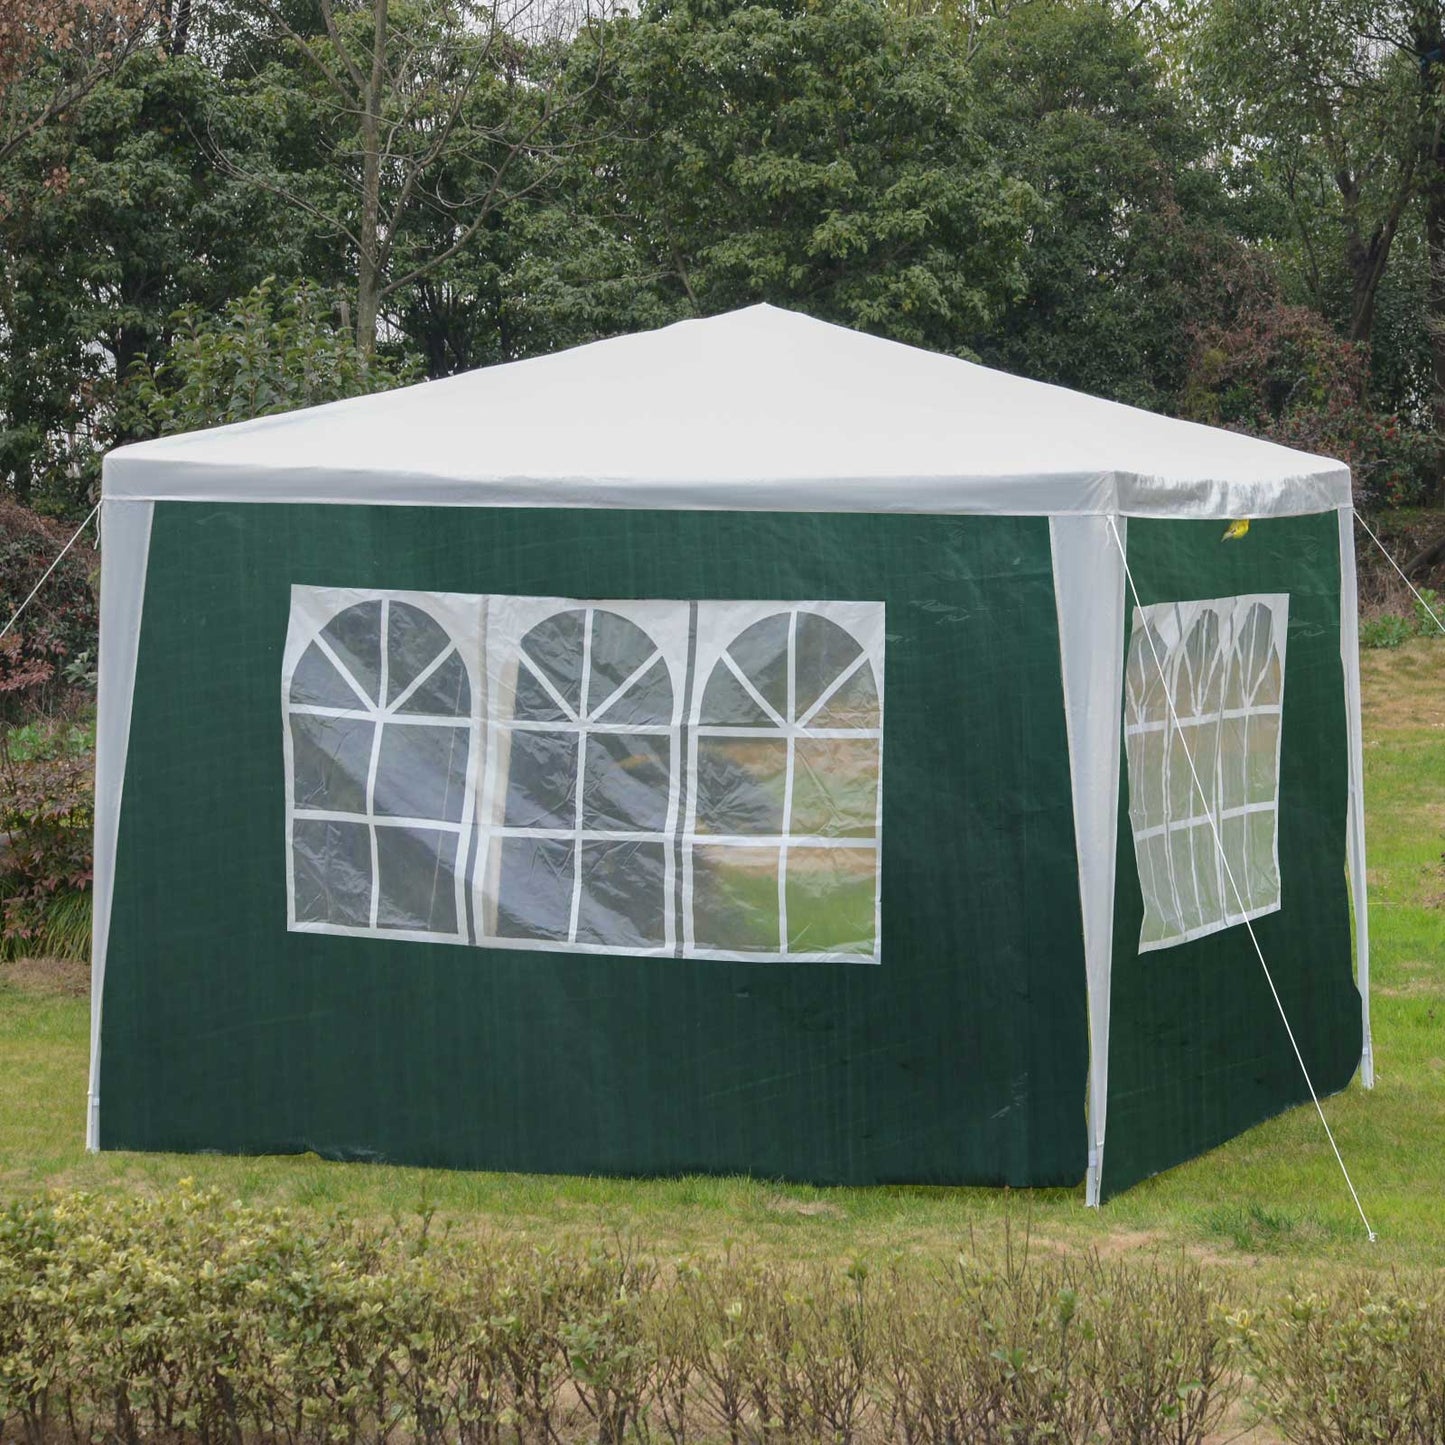 Outsunny 3x2 m Canopy Gazebo Marquee Replacement Side Panel-Green